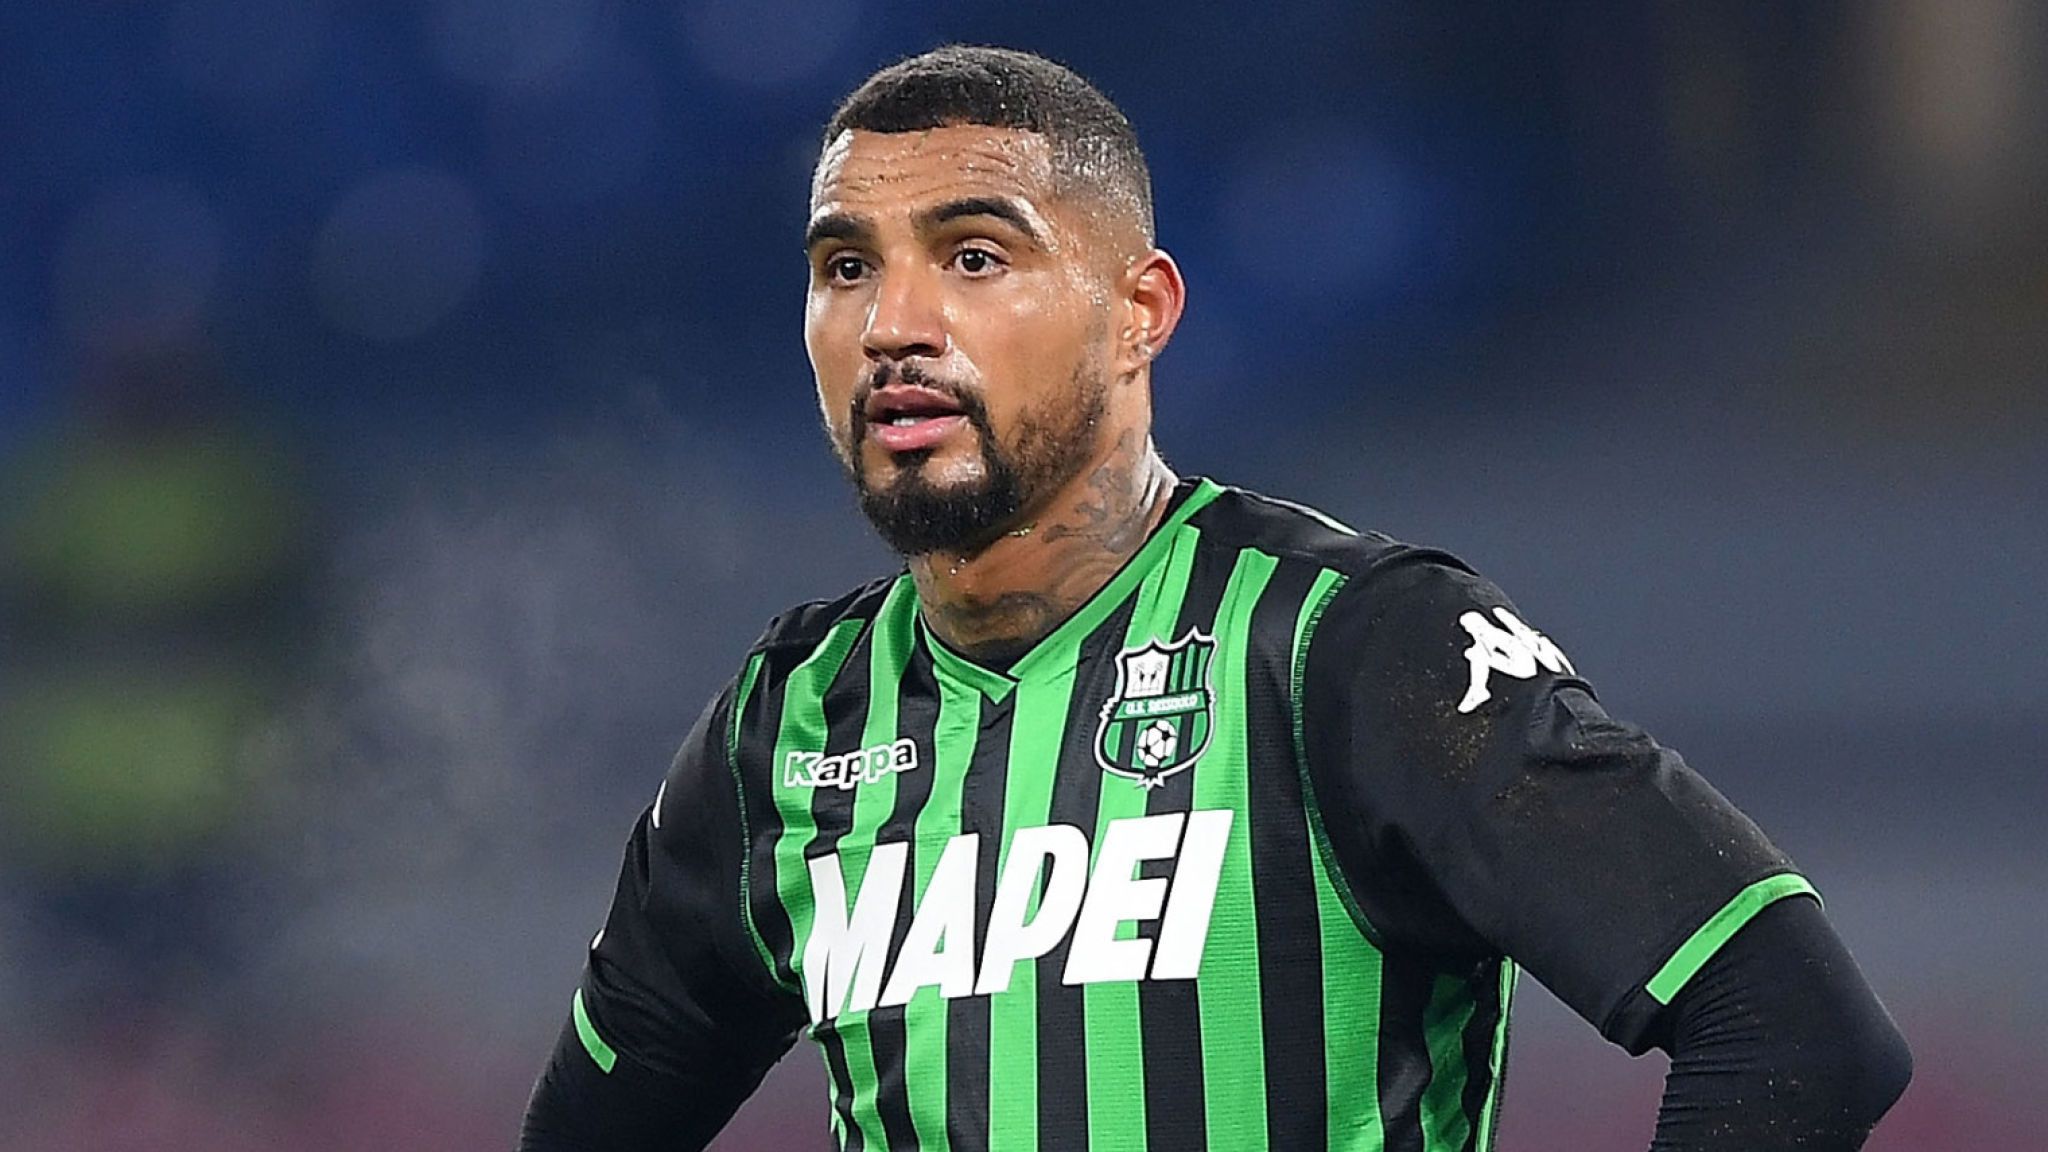 Kevin Prince Boateng - Biography, Height & Life Story | Super Stars Bio